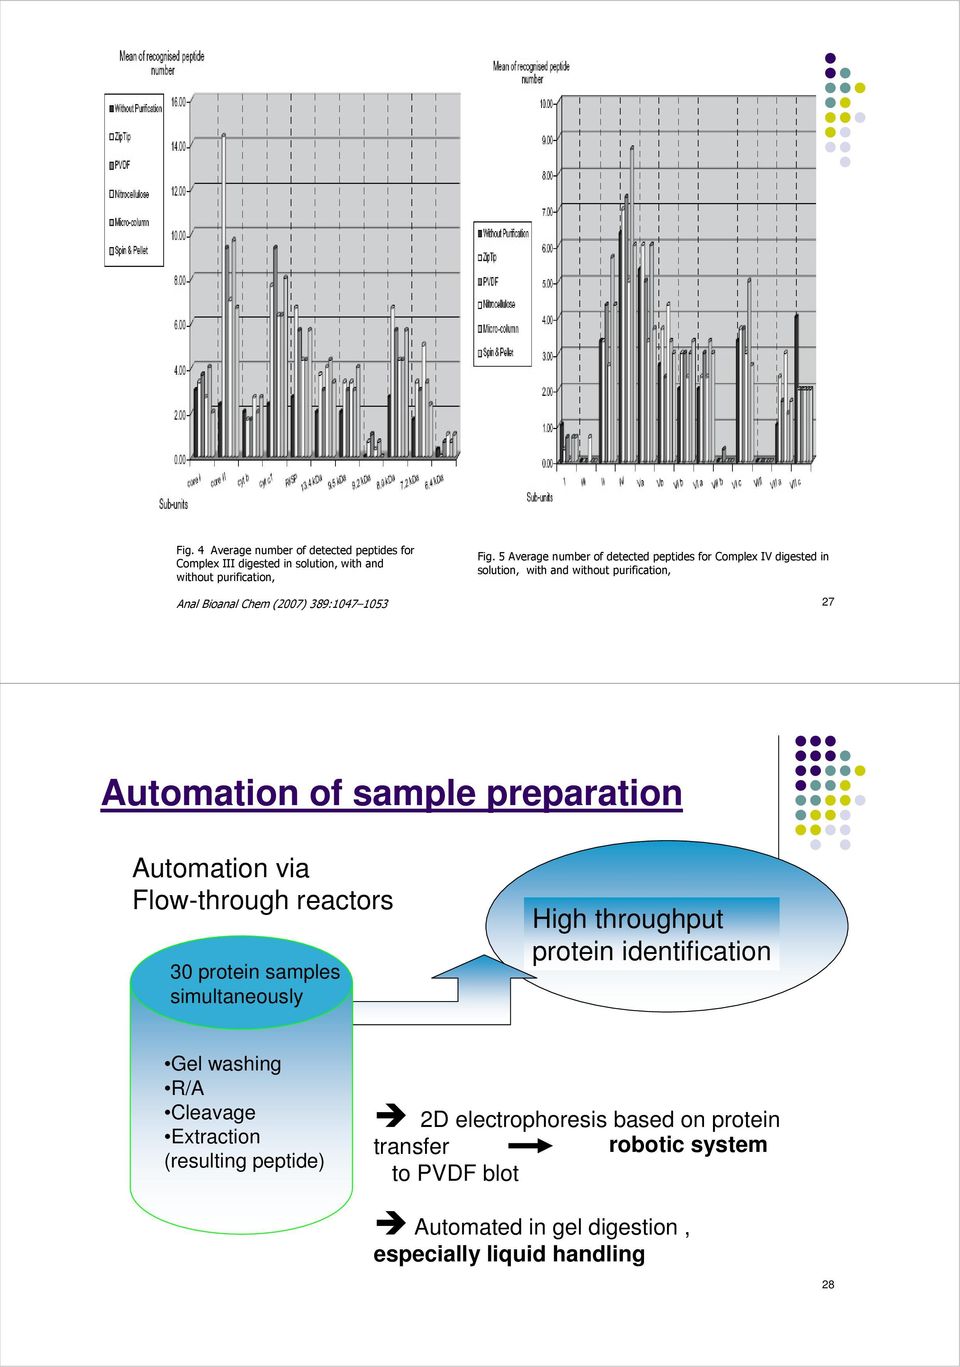 Flow-through reactors 30 protein samples simultaneously High throughput protein identification Gel washing Gel R/A washing R/A Cleavage Cleavage Extraction